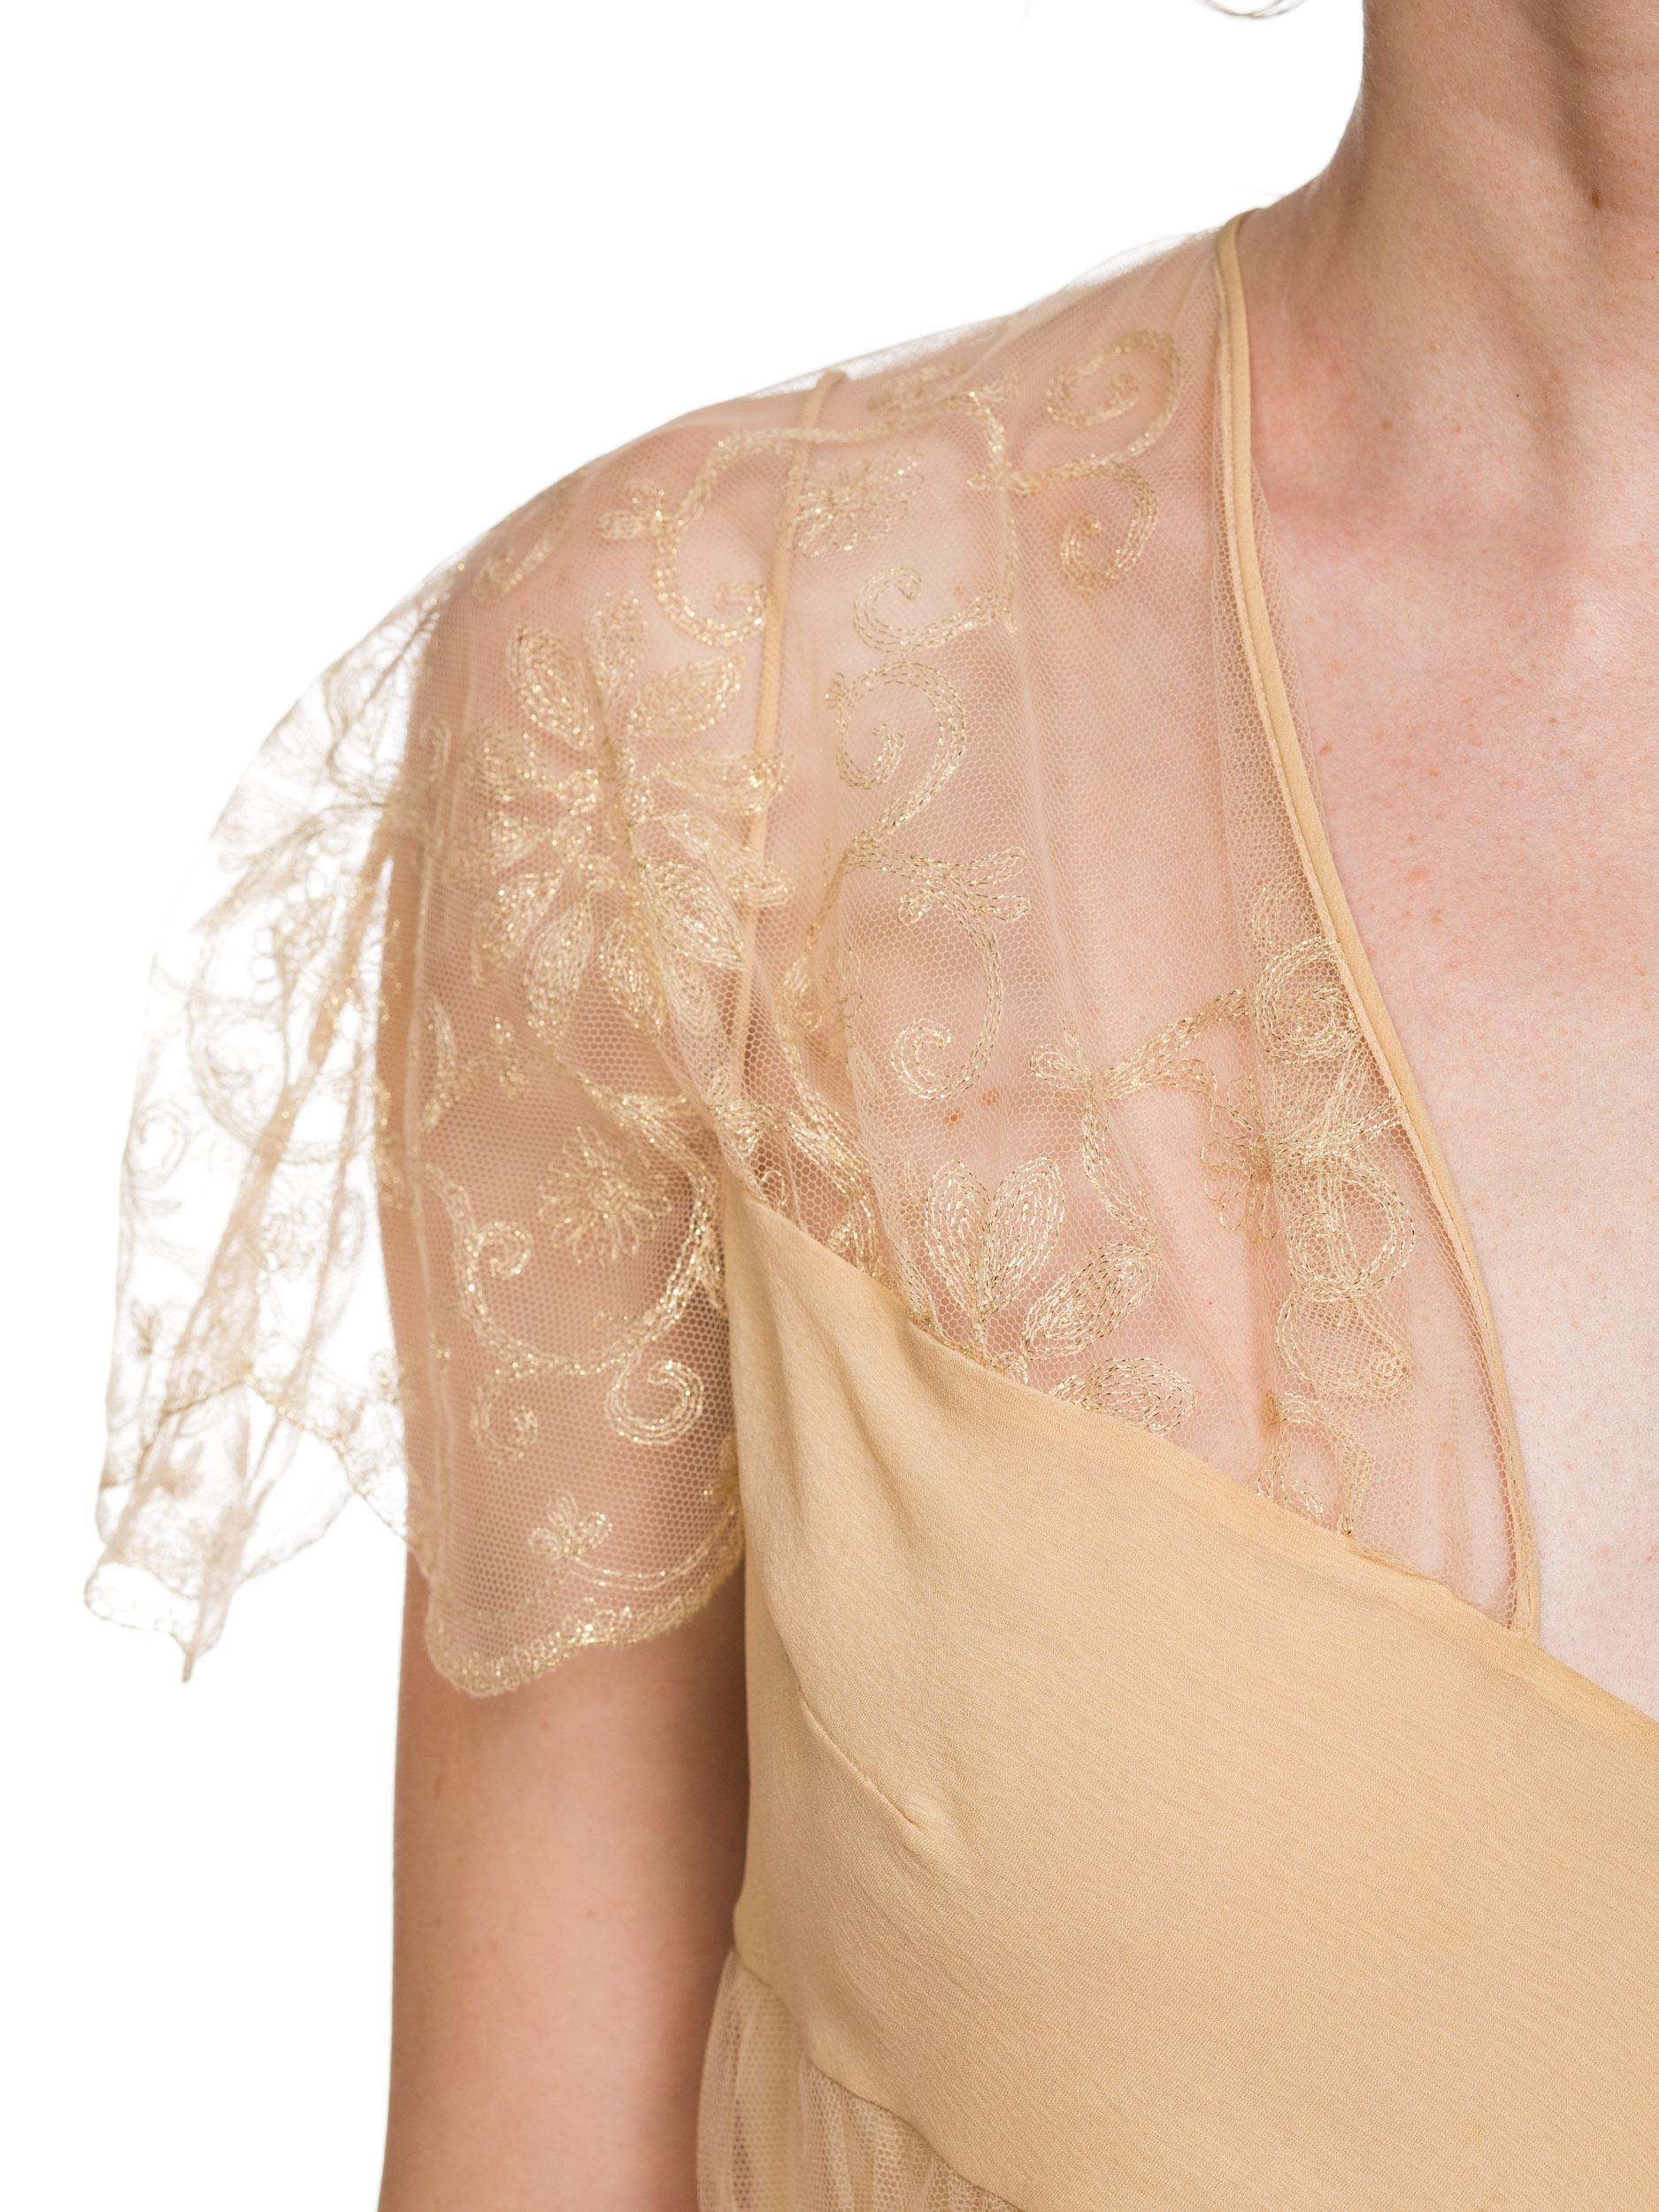 John Galliano for Christian Dior Sheer Lace Blouse 3